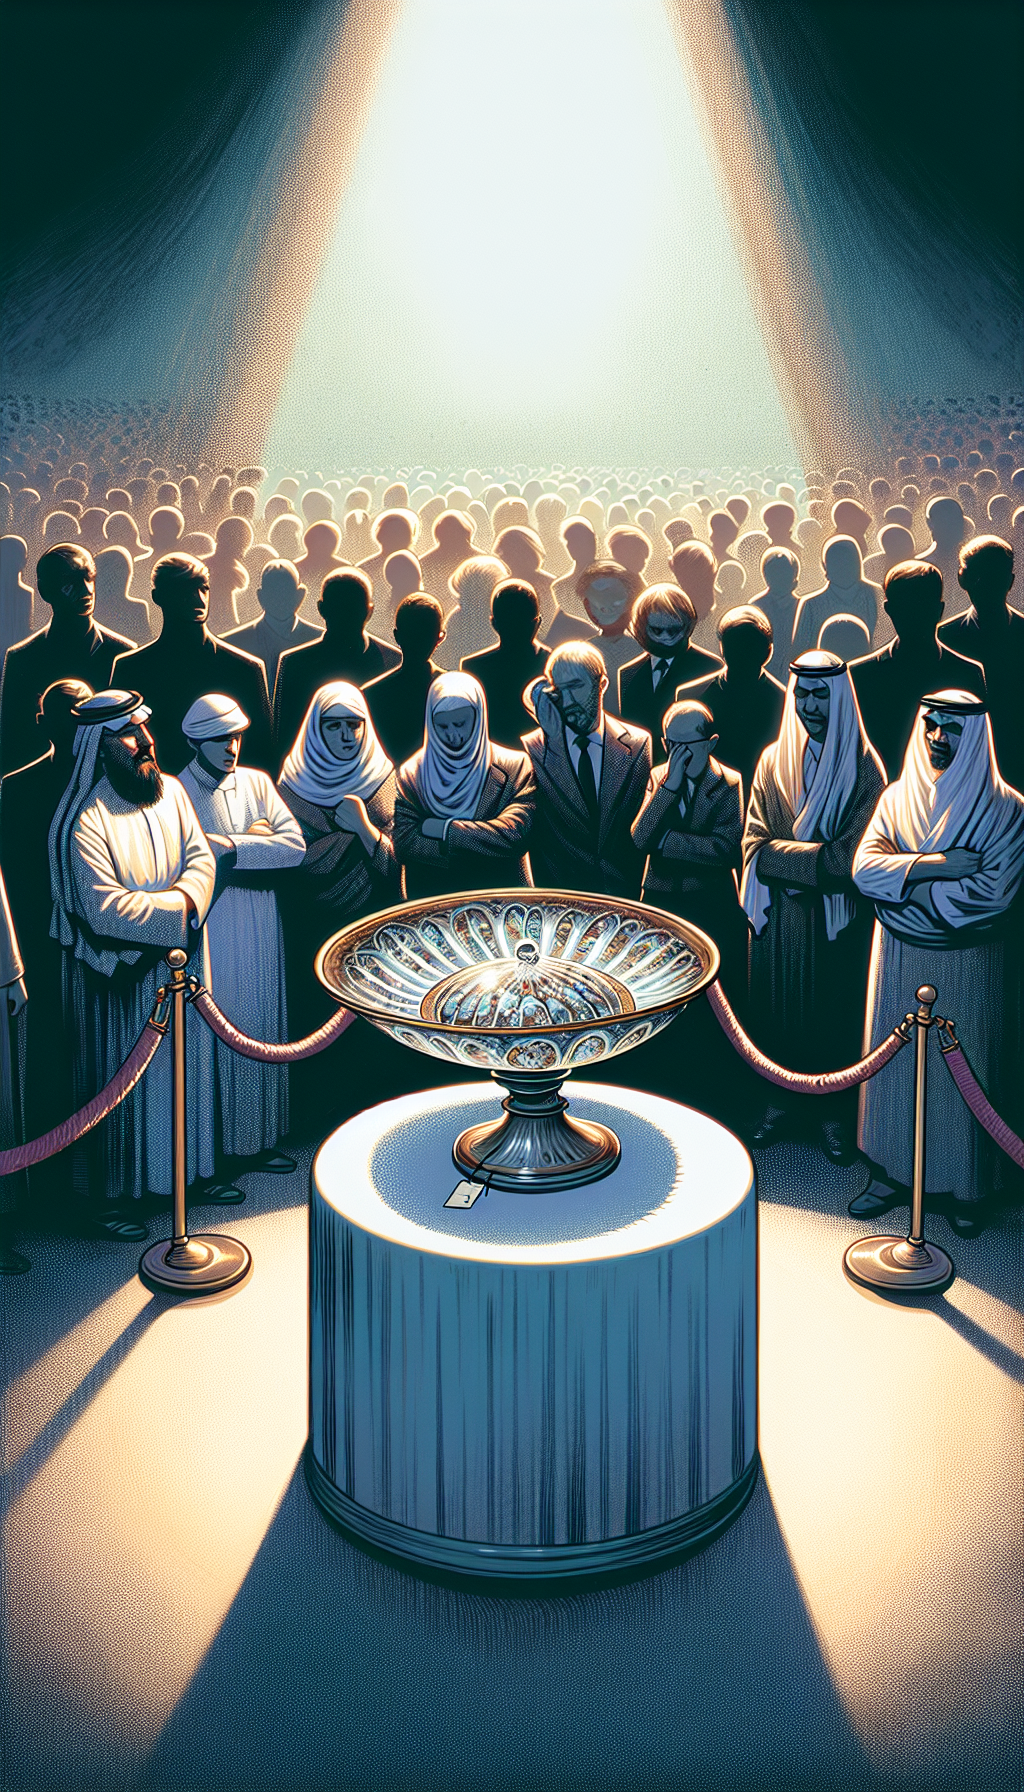 An elegant, antique dish is perched on a pedestal, with a group of silhouetted figures gazing at it longingly from behind a velvet rope. A transparent, ghostly price tag dangles, inflating as the crowd's size increases, symbolizing the allure of rarity and its impact on value. The style transitions from realistic at the dish to impressionistic in the crowd.